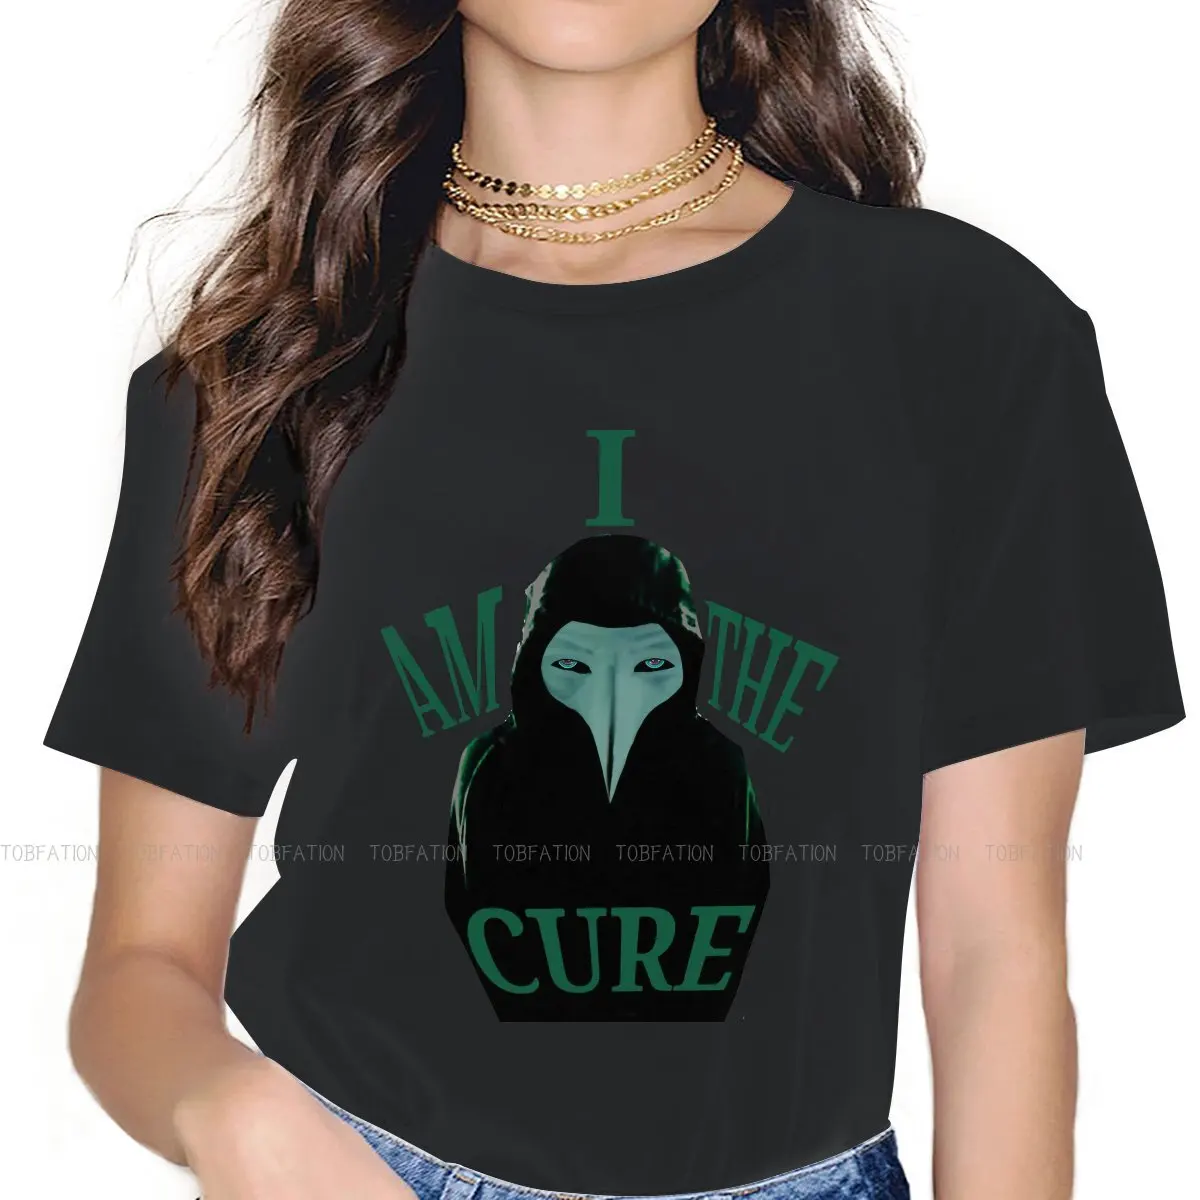 

049 IS THE CURE Women's T Shirt SCP Foundation Girls Tees Harajuku O-neck Tops Basic Tshirt Loose 5XL Vogue